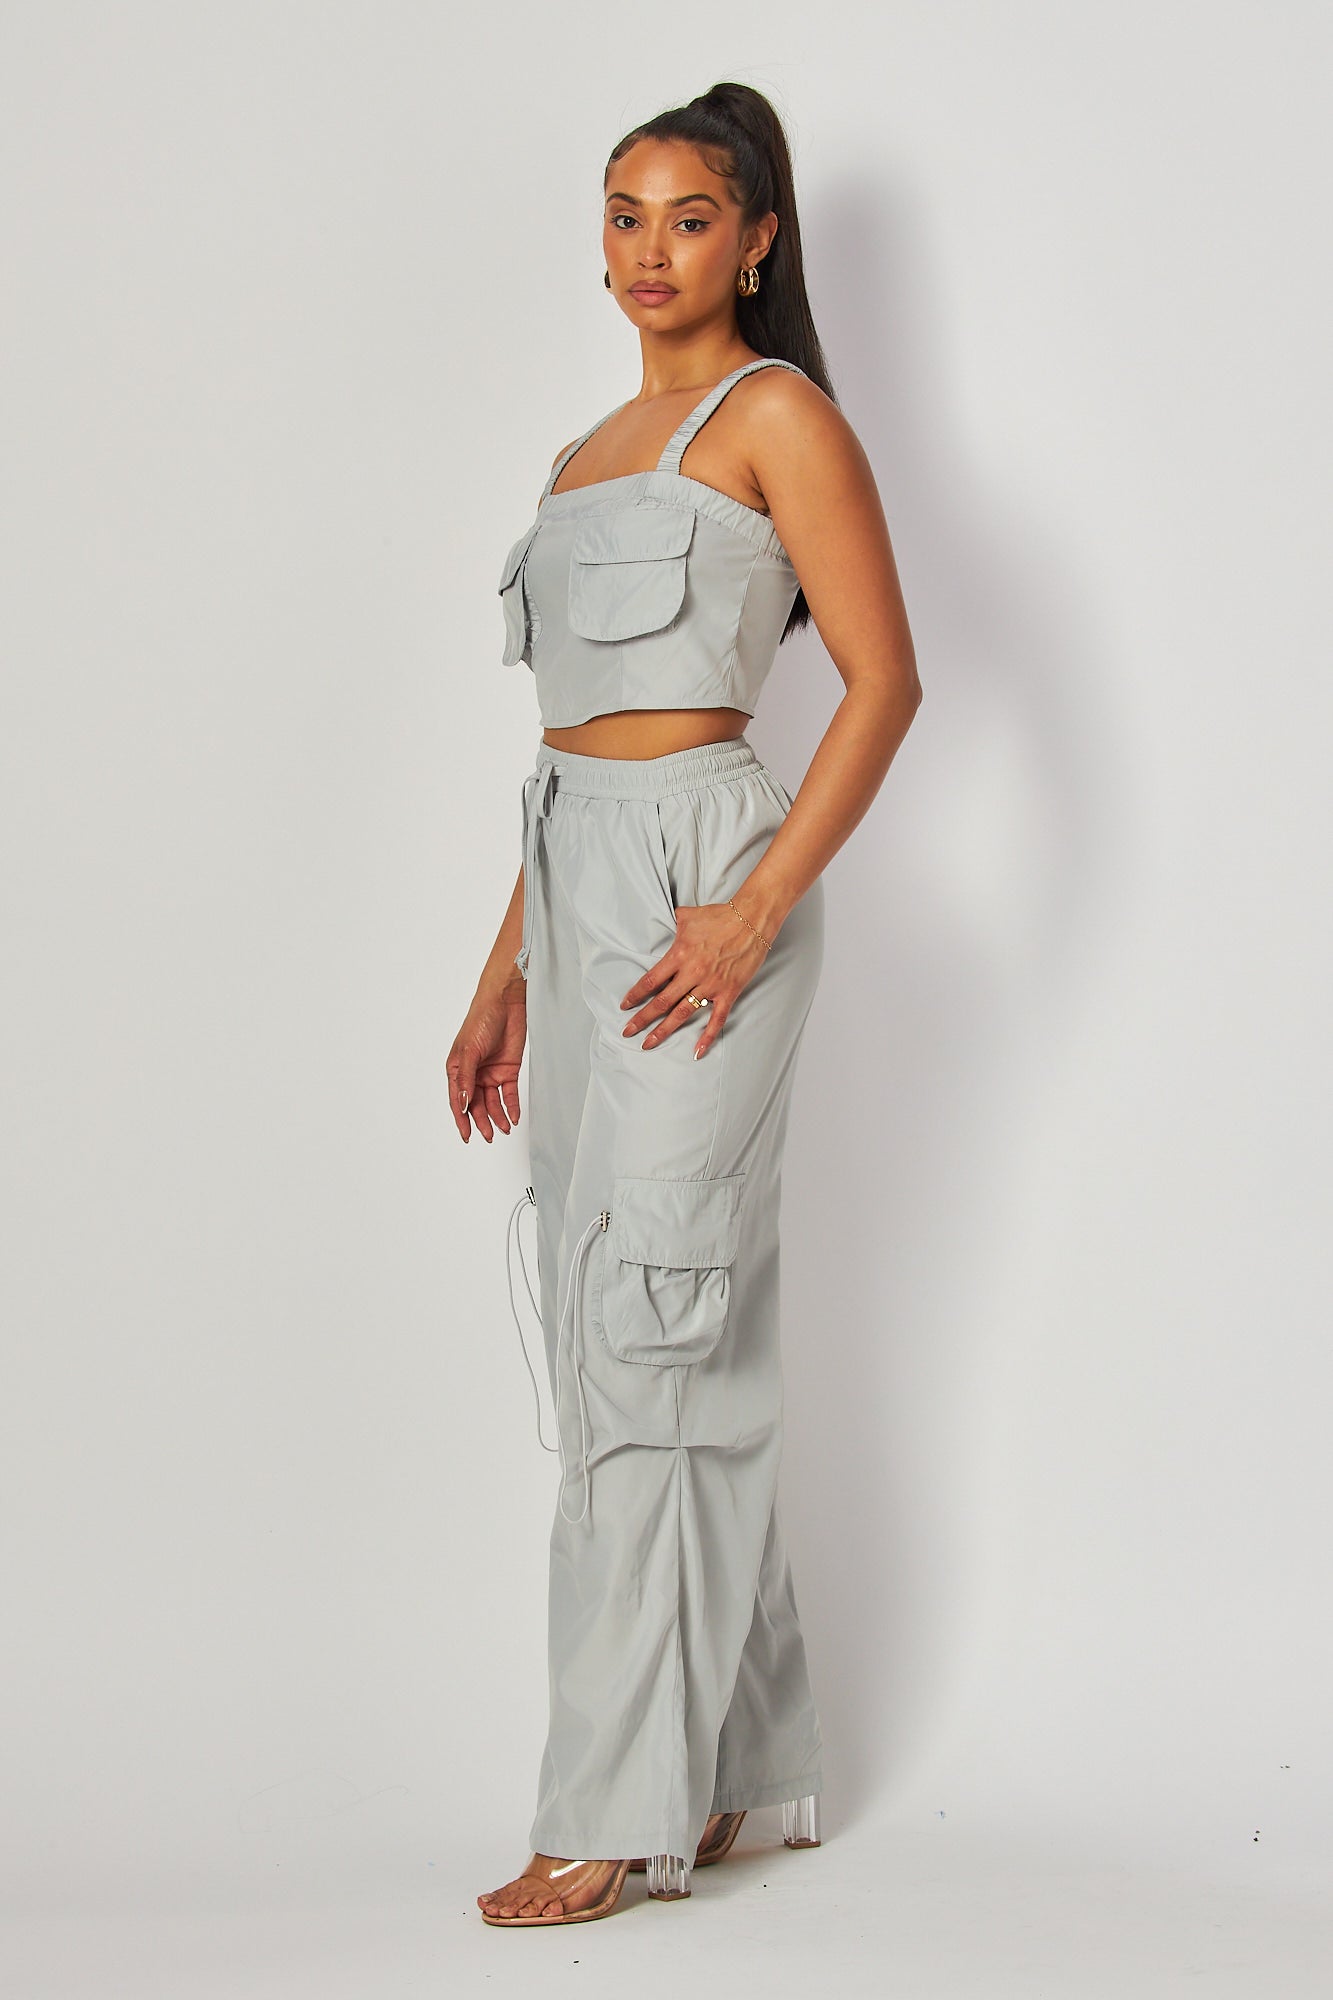 Zuley Crop Tank Top And Cargo Pocket Pants